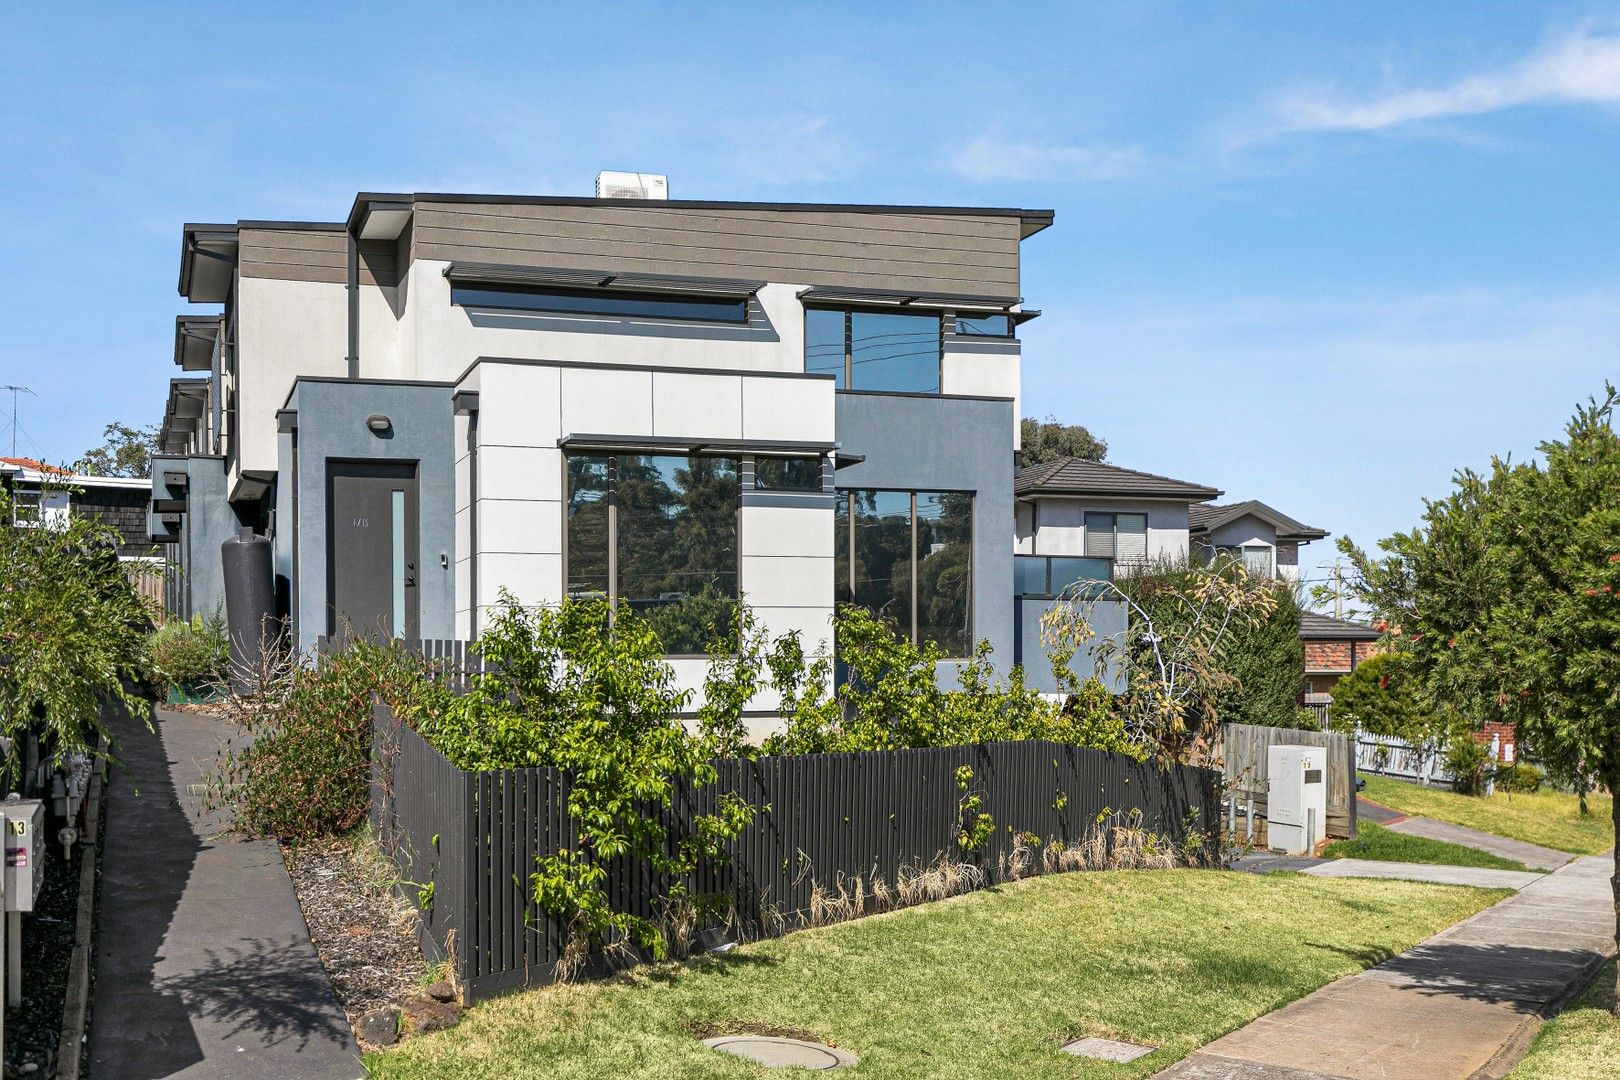 2 bedrooms Townhouse in 2/13 Fawkner Road PASCOE VALE VIC, 3044